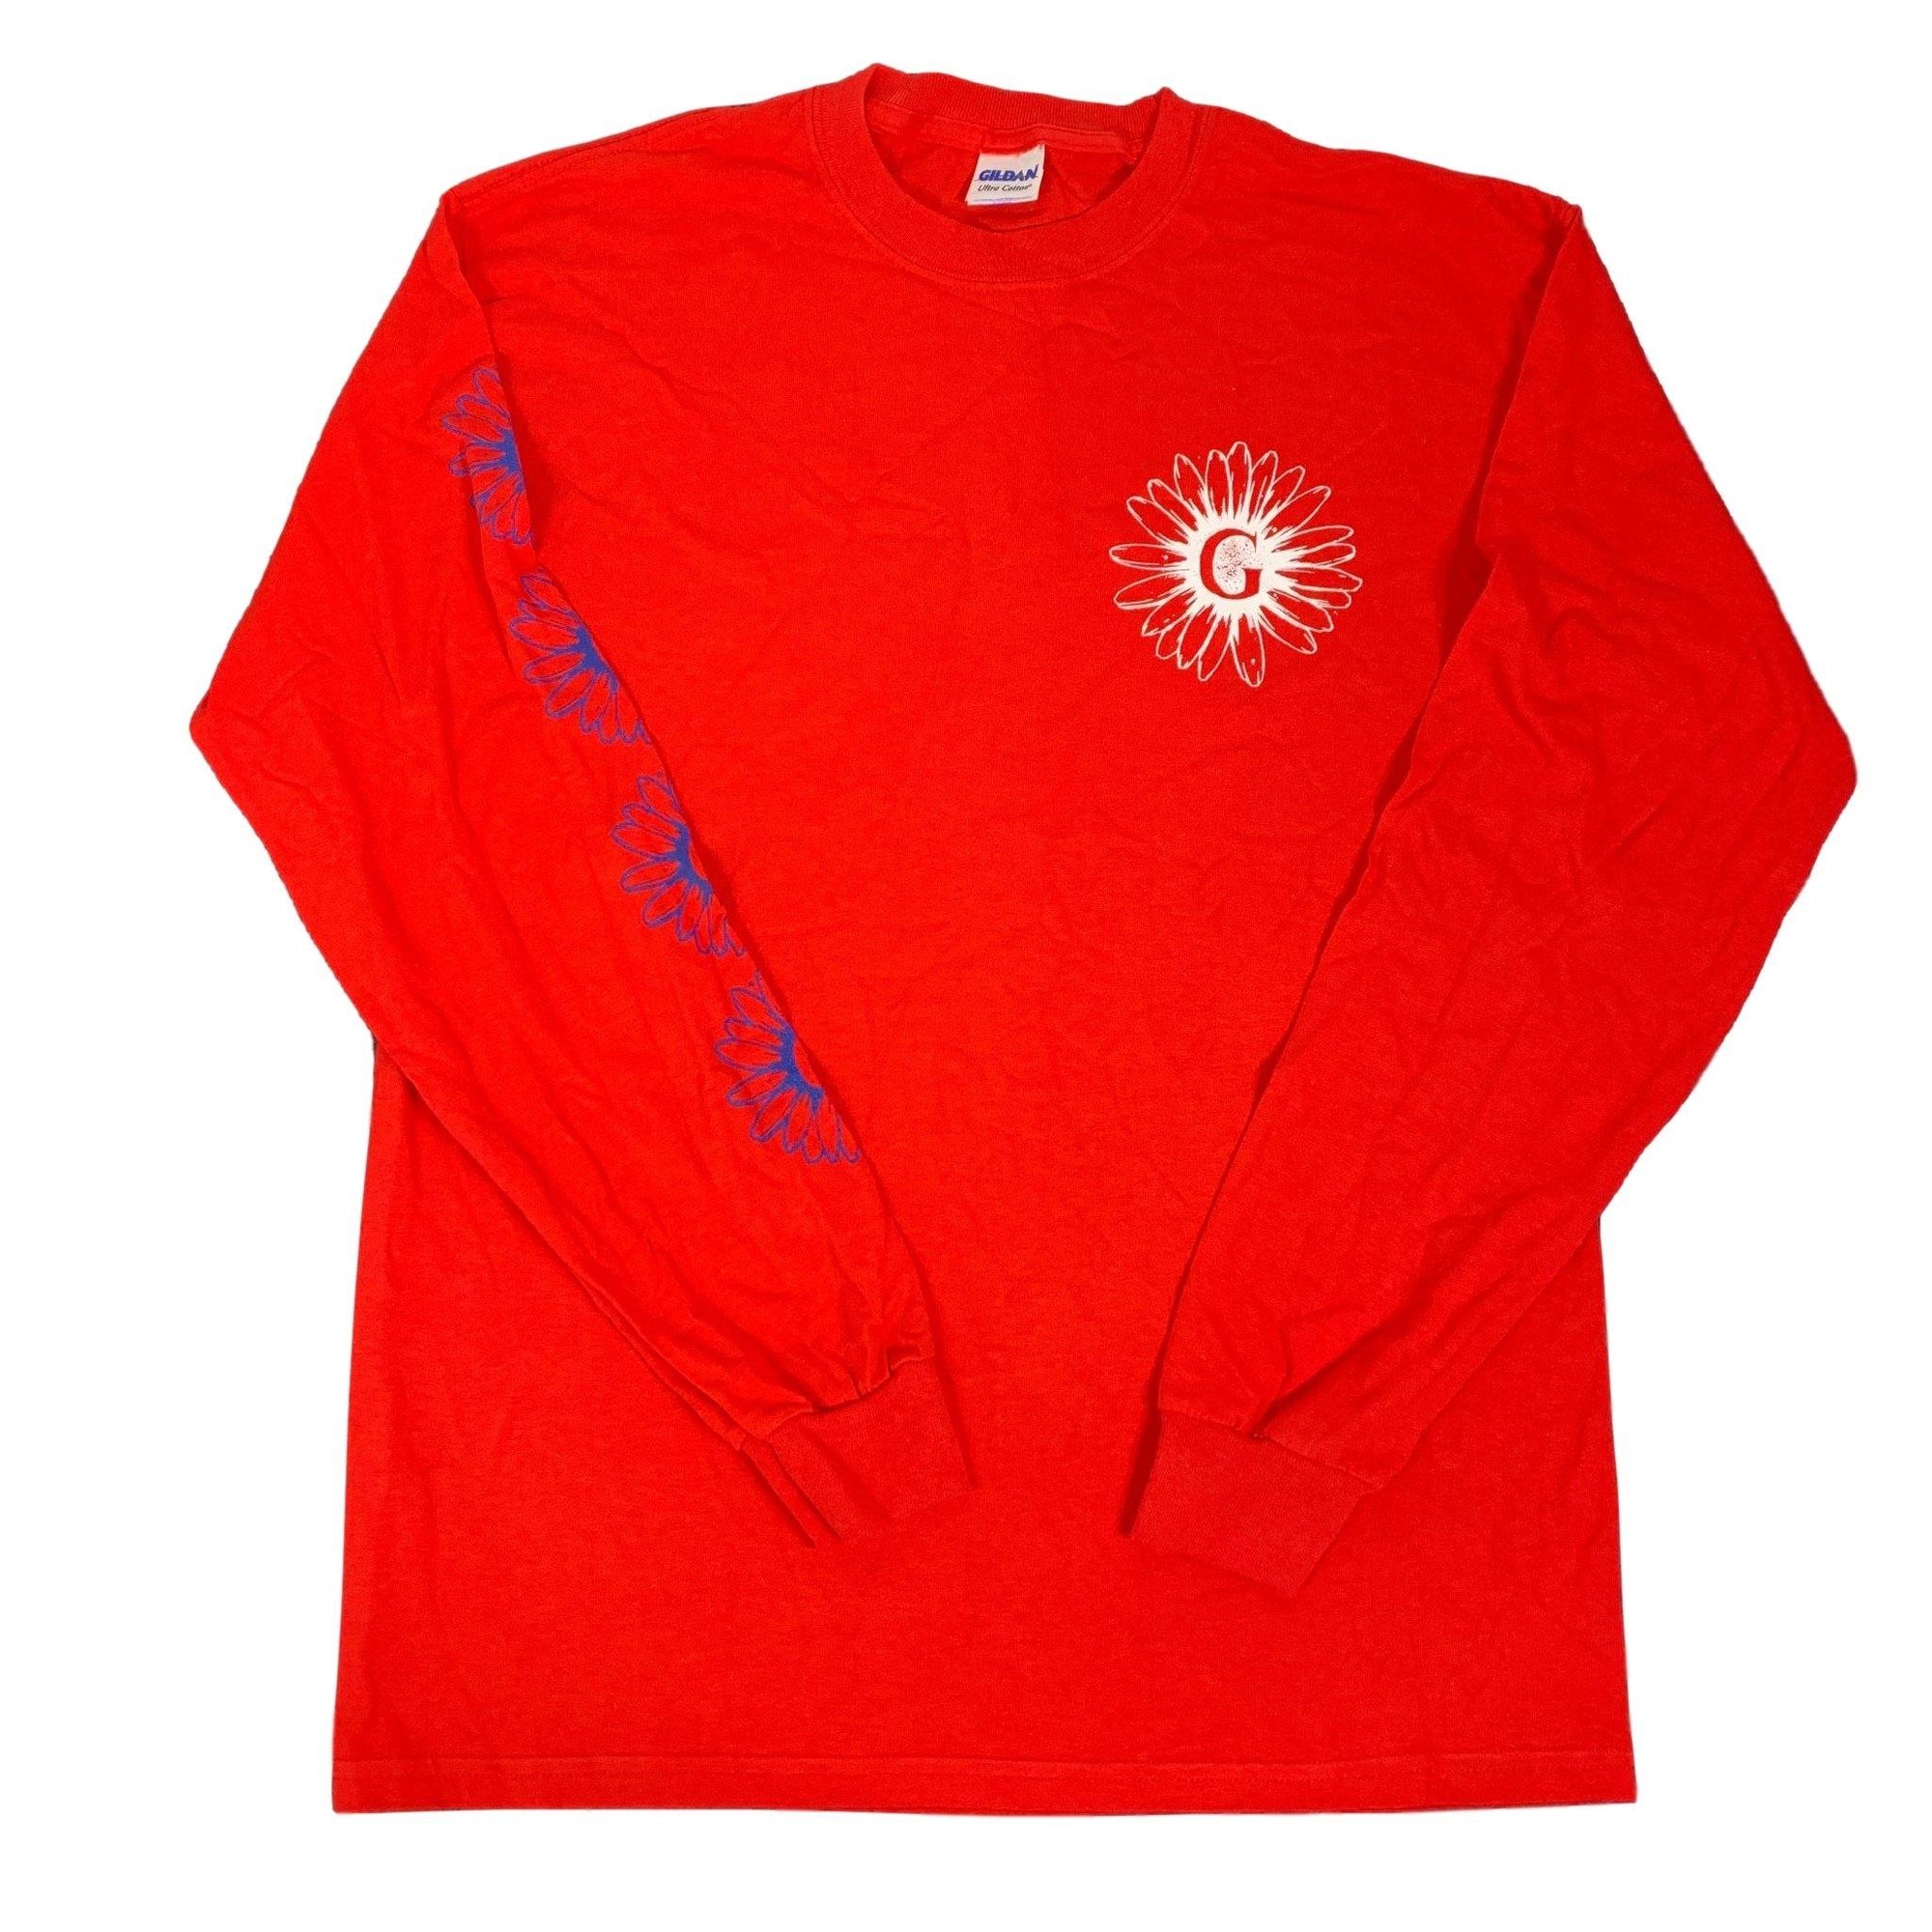 Vintage Give "We Are Love" Long Sleeve Shirt - jointcustodydc